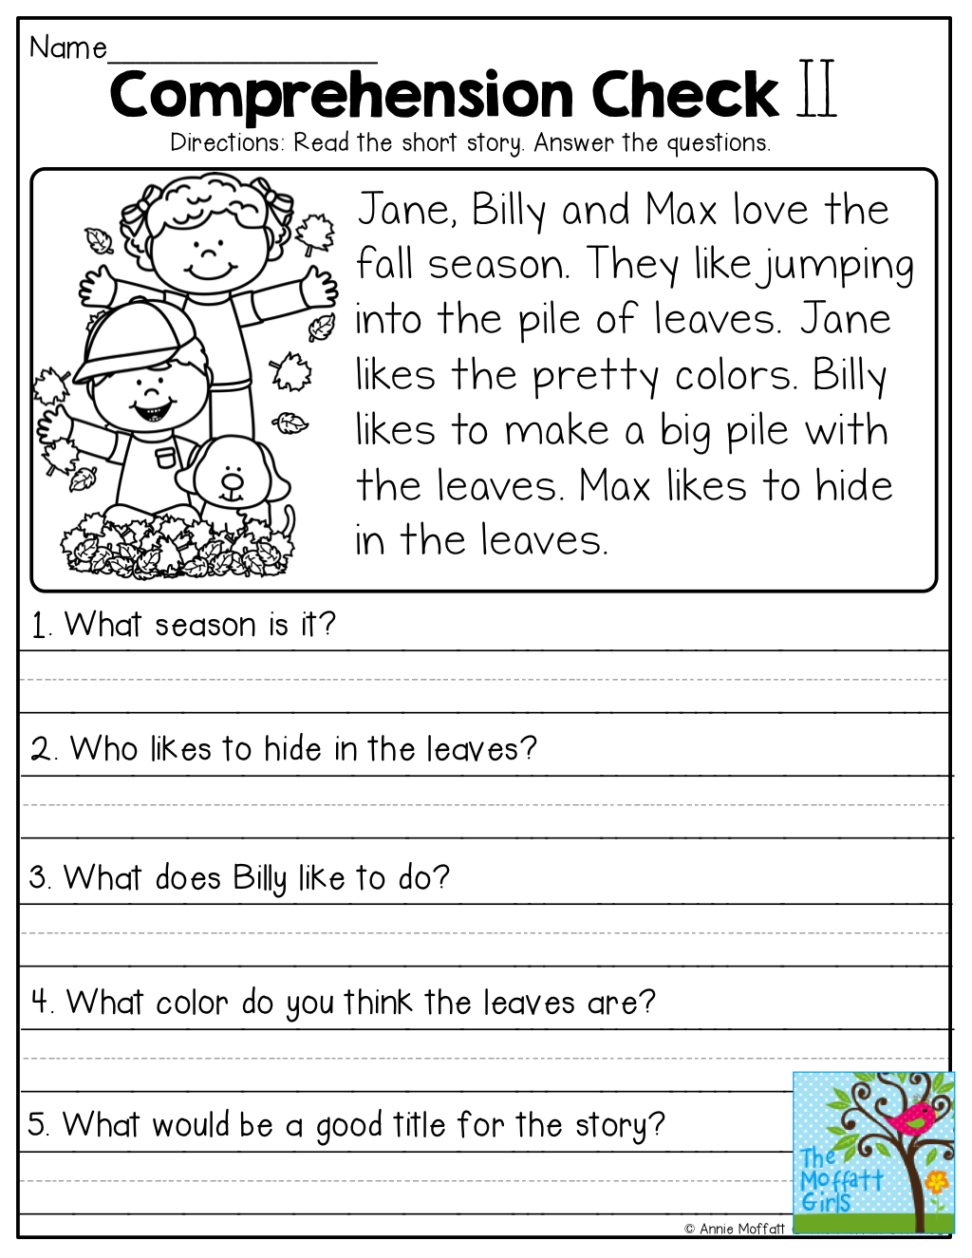 Worksheet. Free Printable Reading Comprehension Worksheets - Free Printable Short Stories With Comprehension Questions